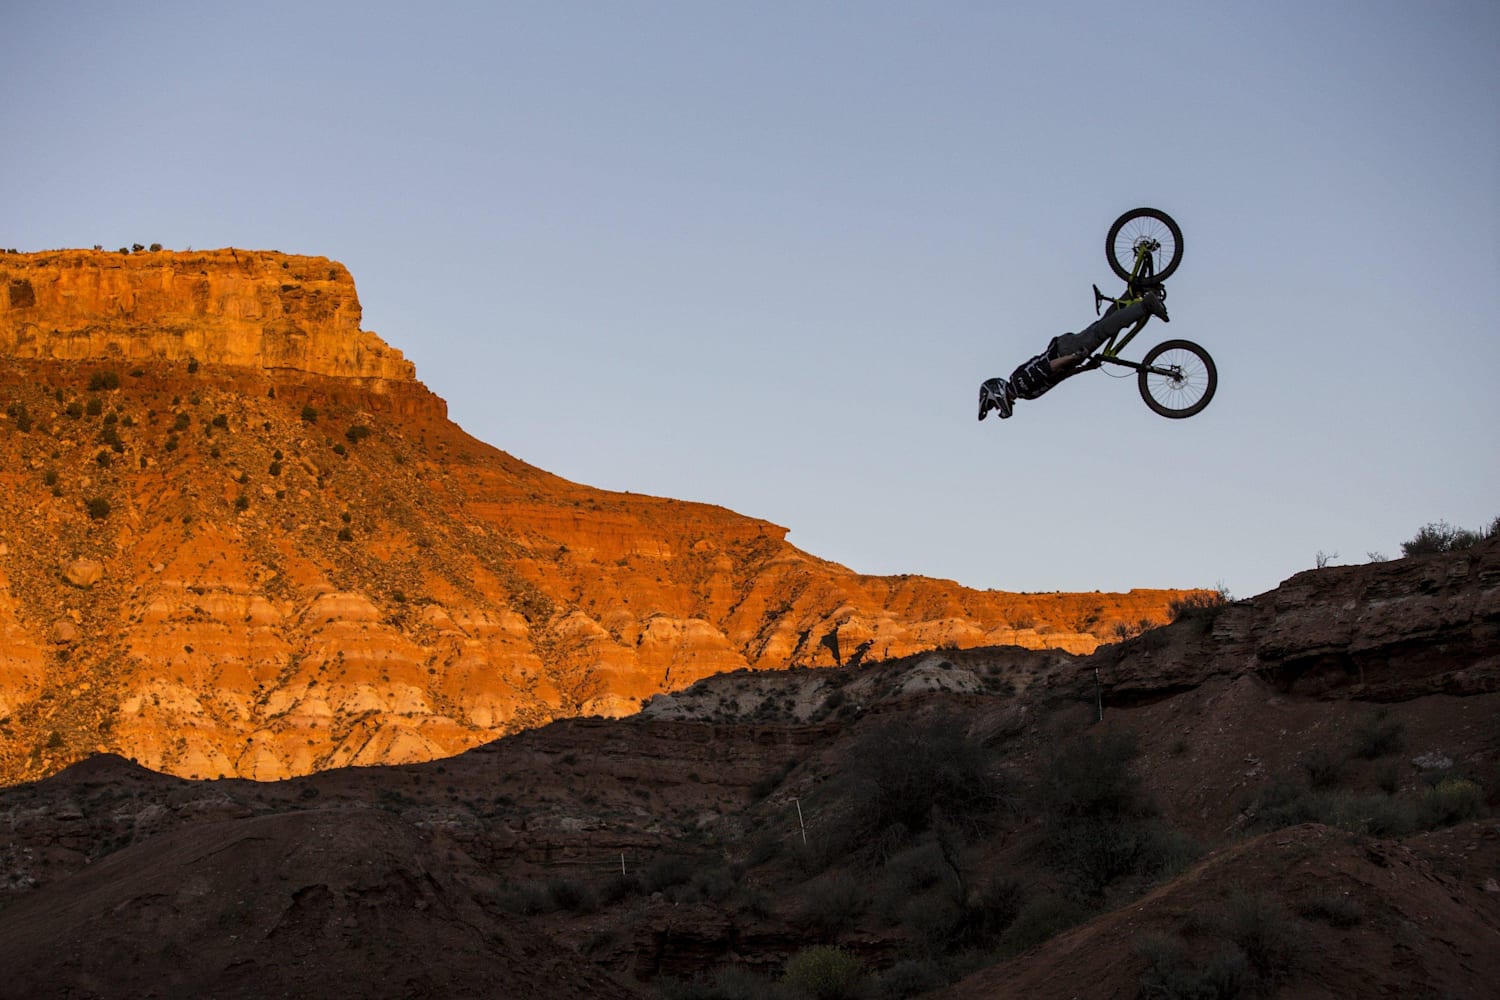 Watch Best Red Bull Rampage Tricks of All Time